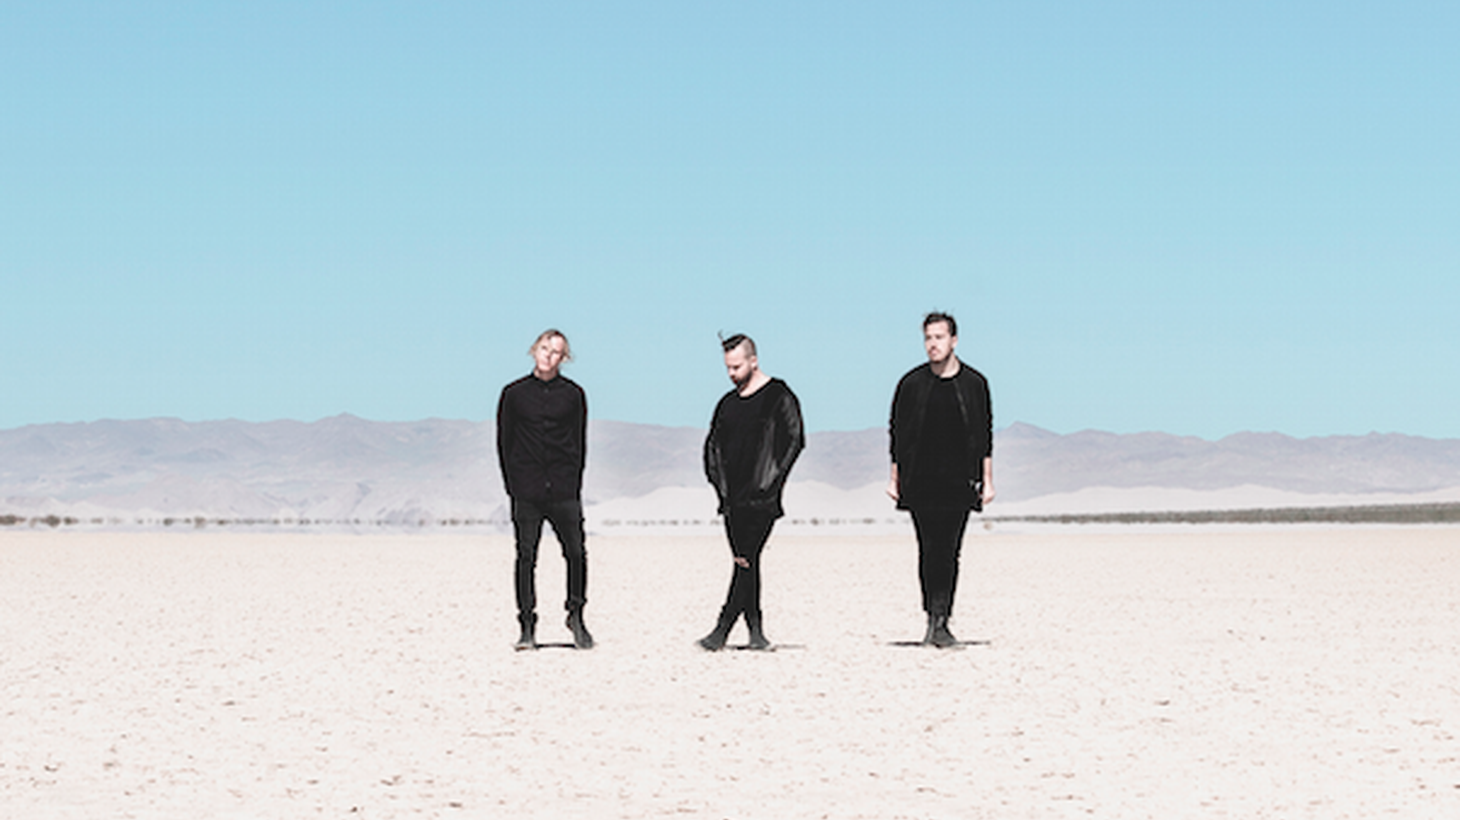 LA-based Australian trio Rüfüs Du Sol are quickly becoming one of the most popular live electronic bands in the world. They kick off a massive North American tour in October, including sold out dates at The Shrine.